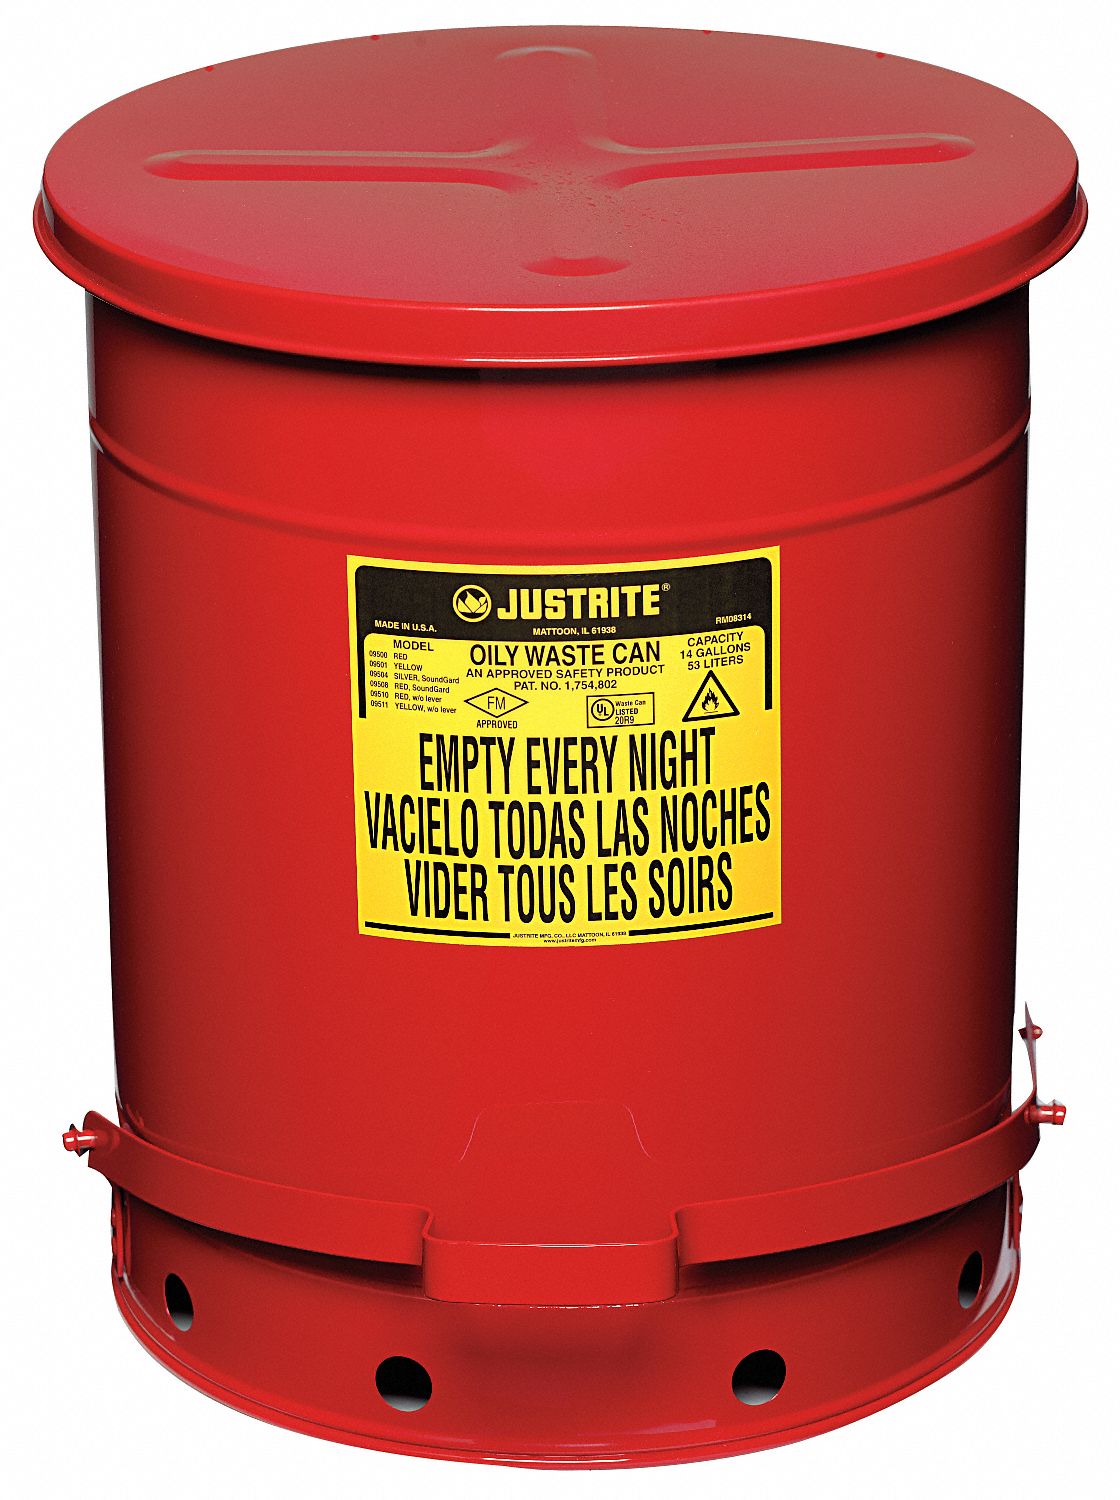 JUSTRITE Oily Waste Can: 14 gal Capacity, Red, Sound Dampening Foot  Operated Self Closing